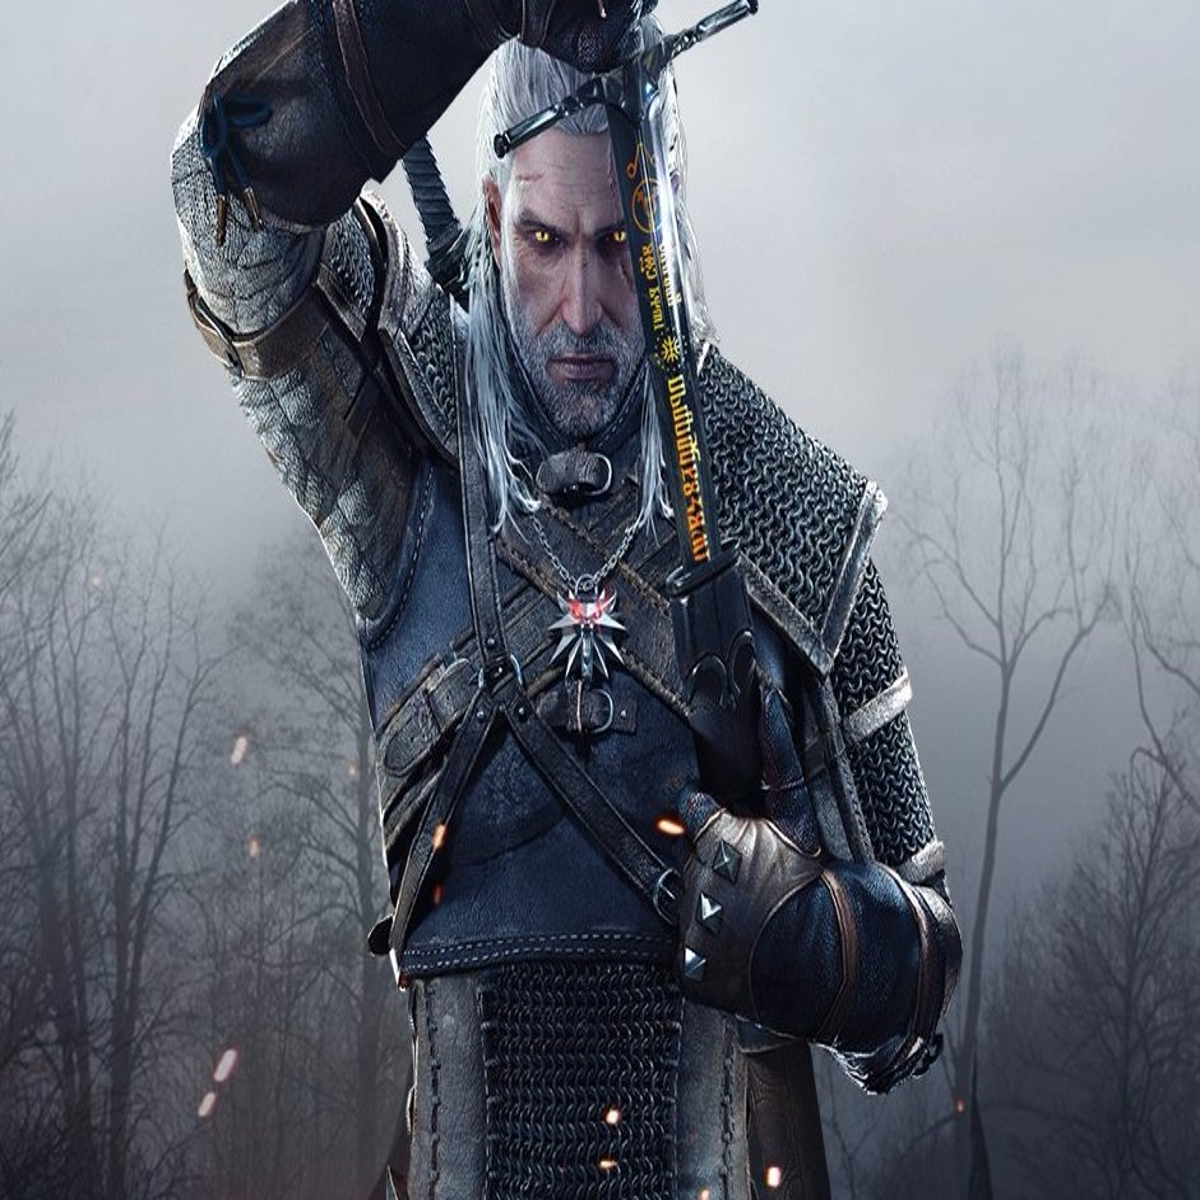 Started playing Witcher for the first time, what's up with Geralt's sword  stance? : r/gaming